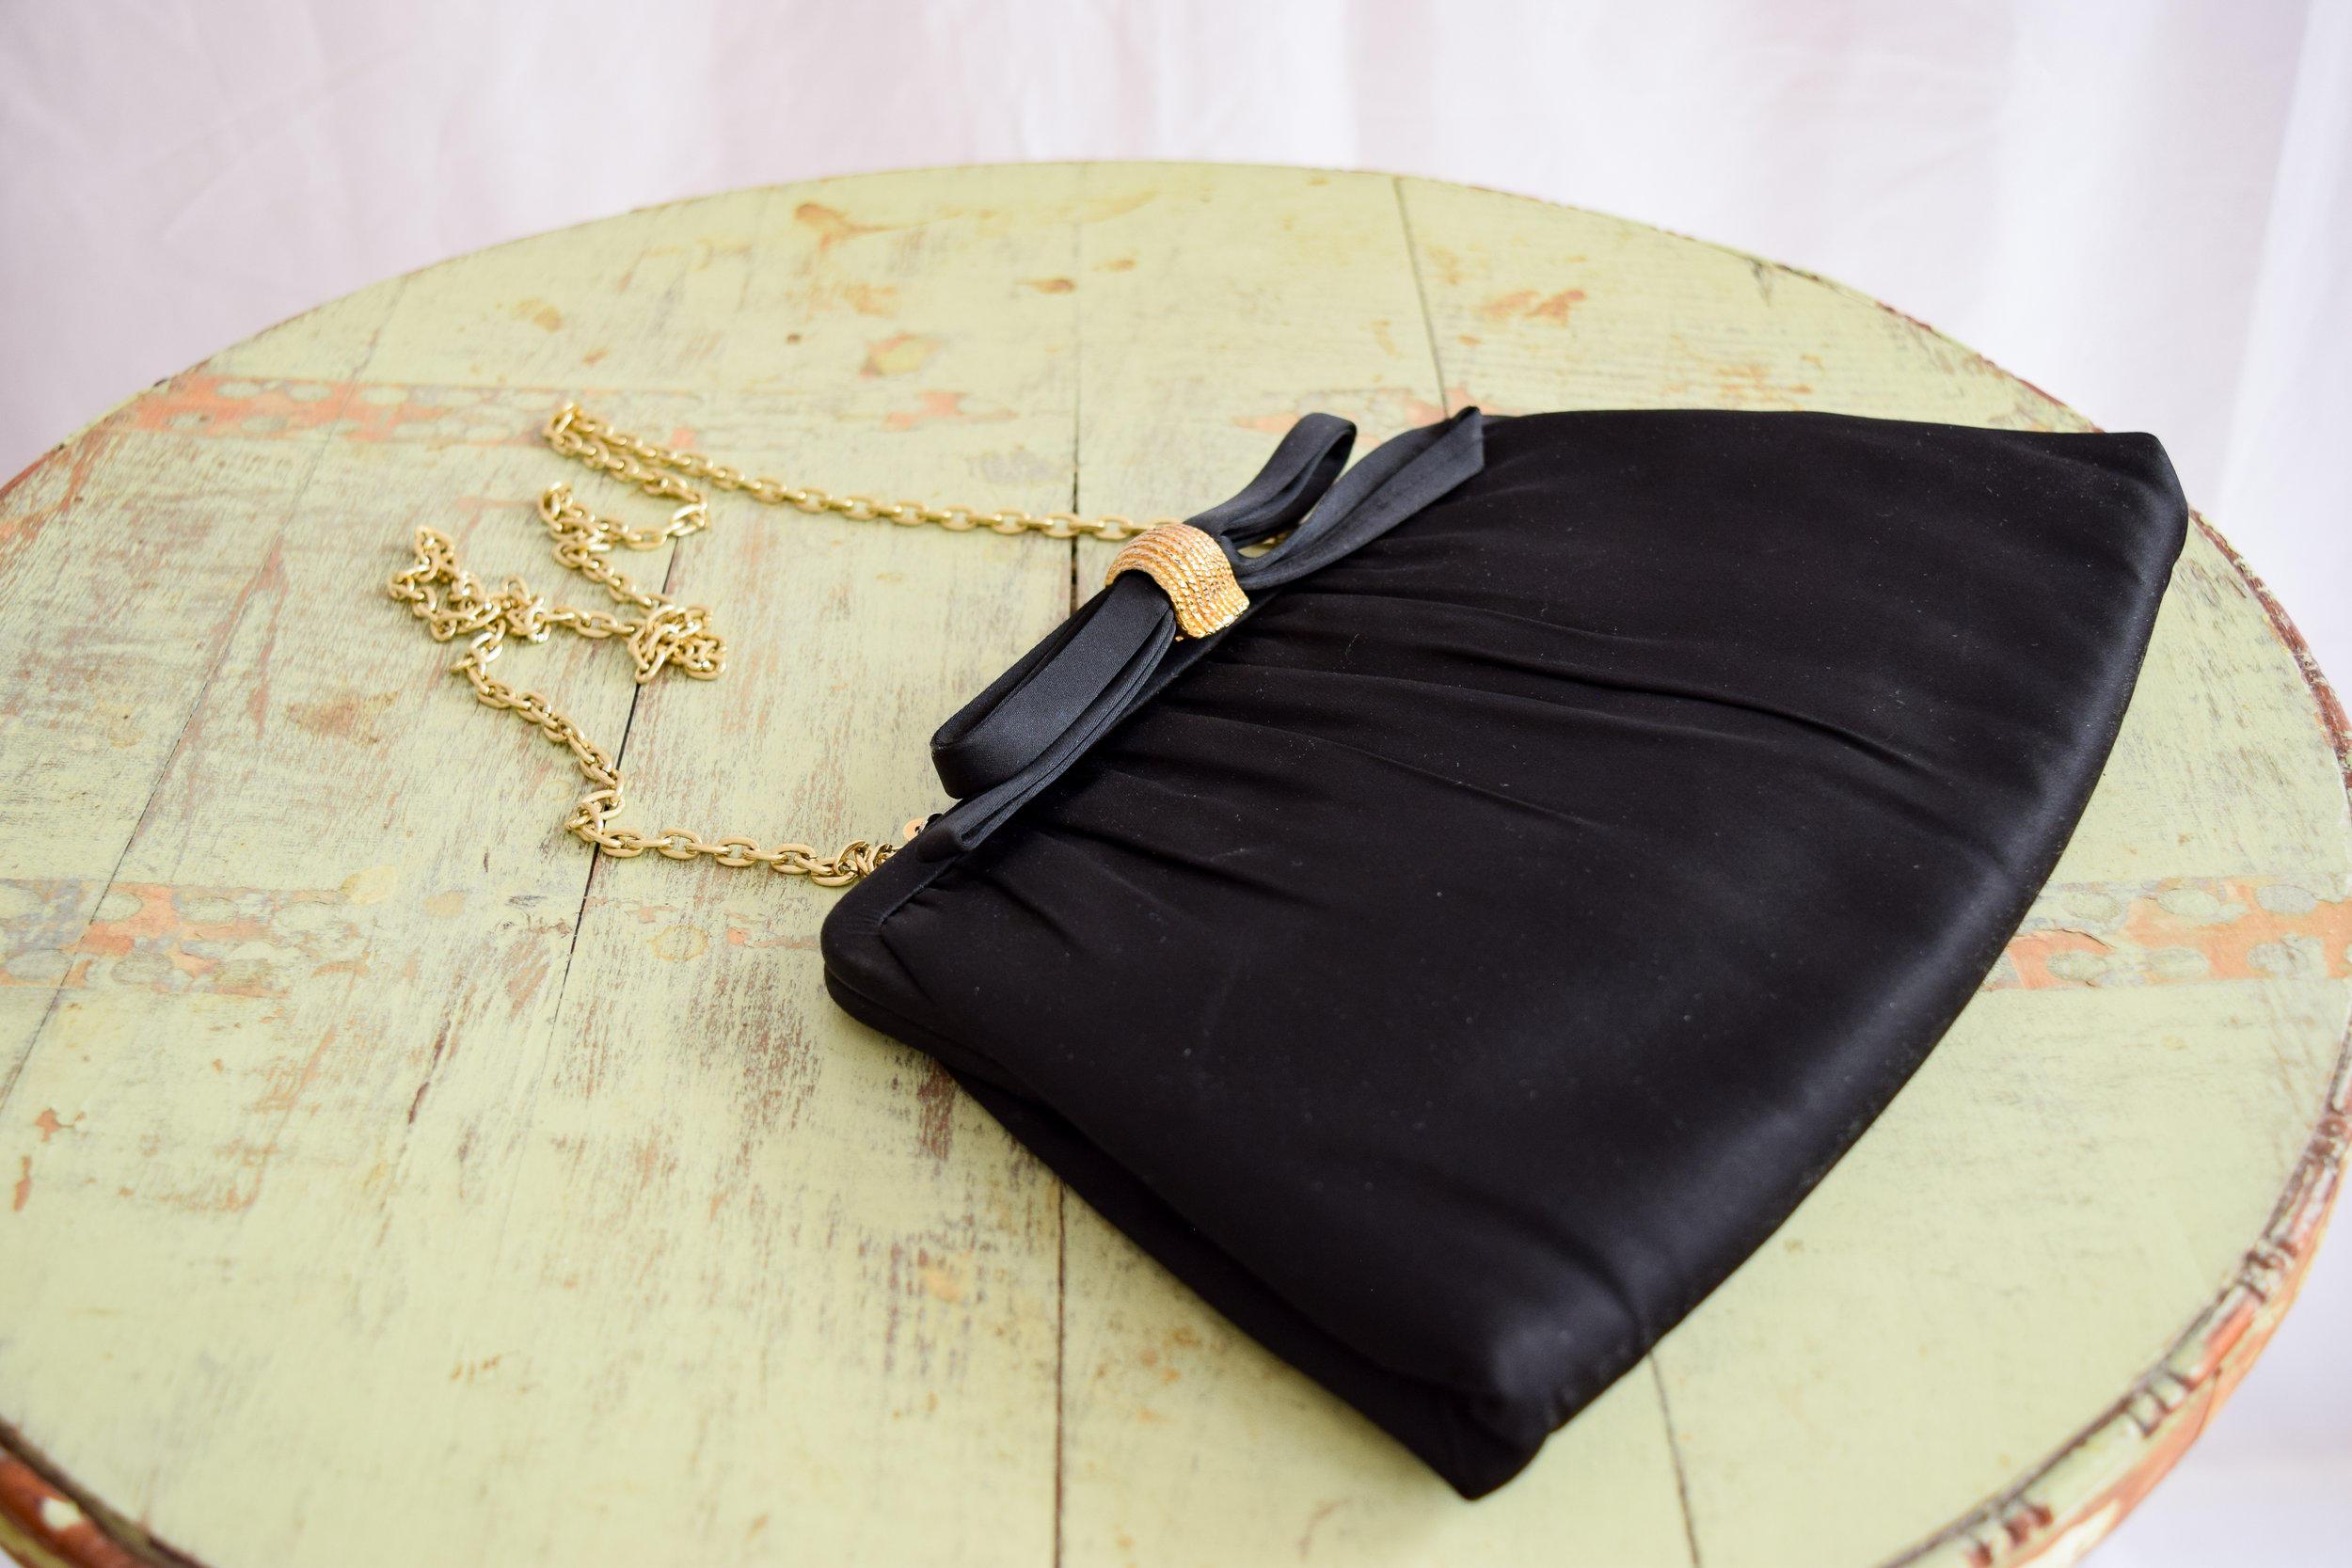 Vintage mid century After Five black evening clutch purse with brass bamboo handle